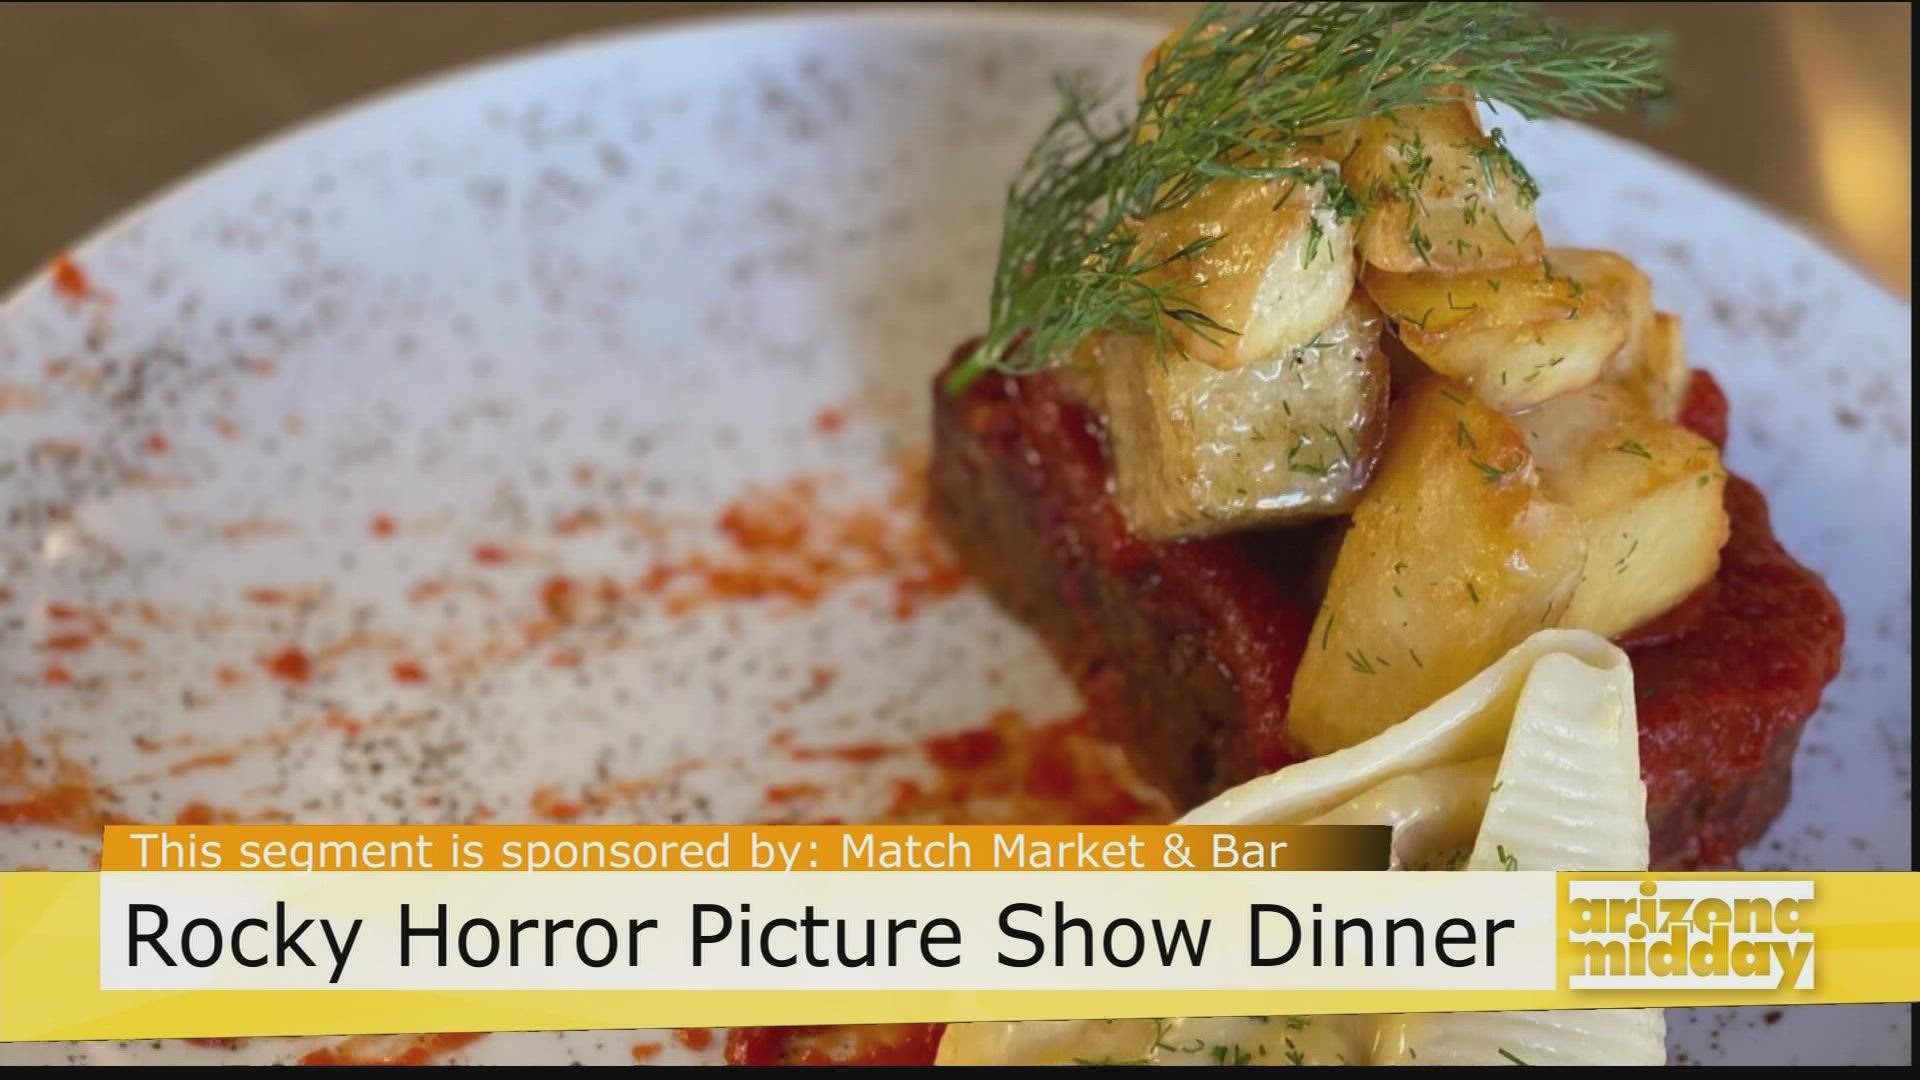 Match Market + Bar is hosting a 4-course "Rocky Horror Picture Show" themed dinner. Don't shiver with anticipation we've got a look at what's on the slab for dinner.